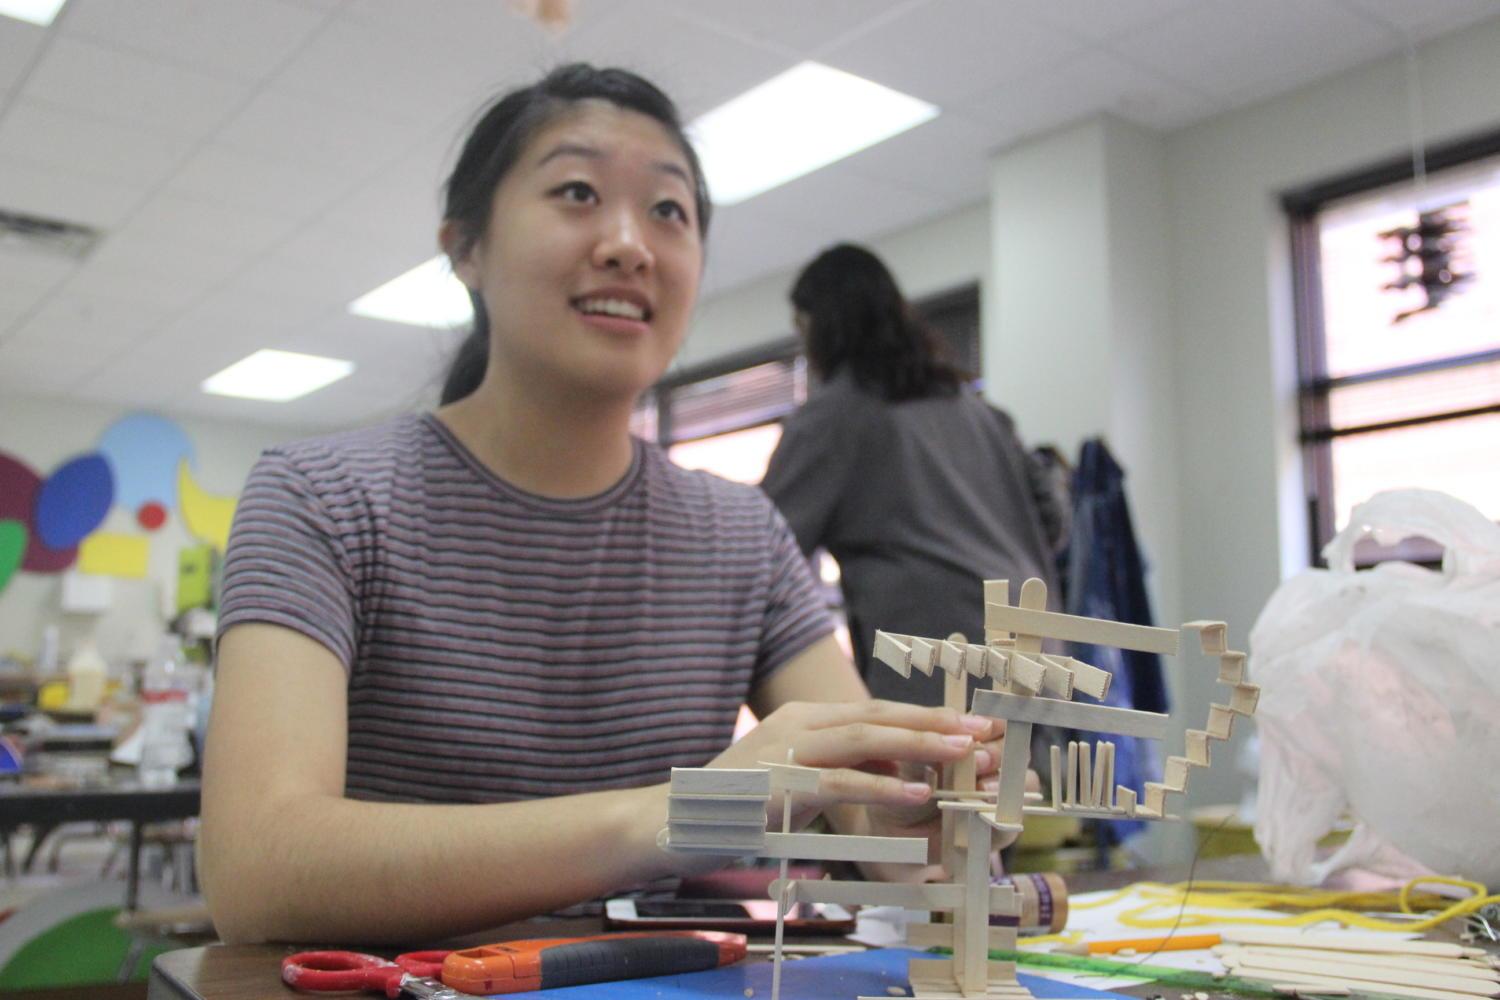 Coppell High School senior Eunice Choe works on a 3D sculpture during Cameron Tiede’s fourth period AP 3D Design class on May 12. AP 3D Design was one of the classes that was going to be cut for next year, but was added back after another art teacher’s contact was approved by the district. 